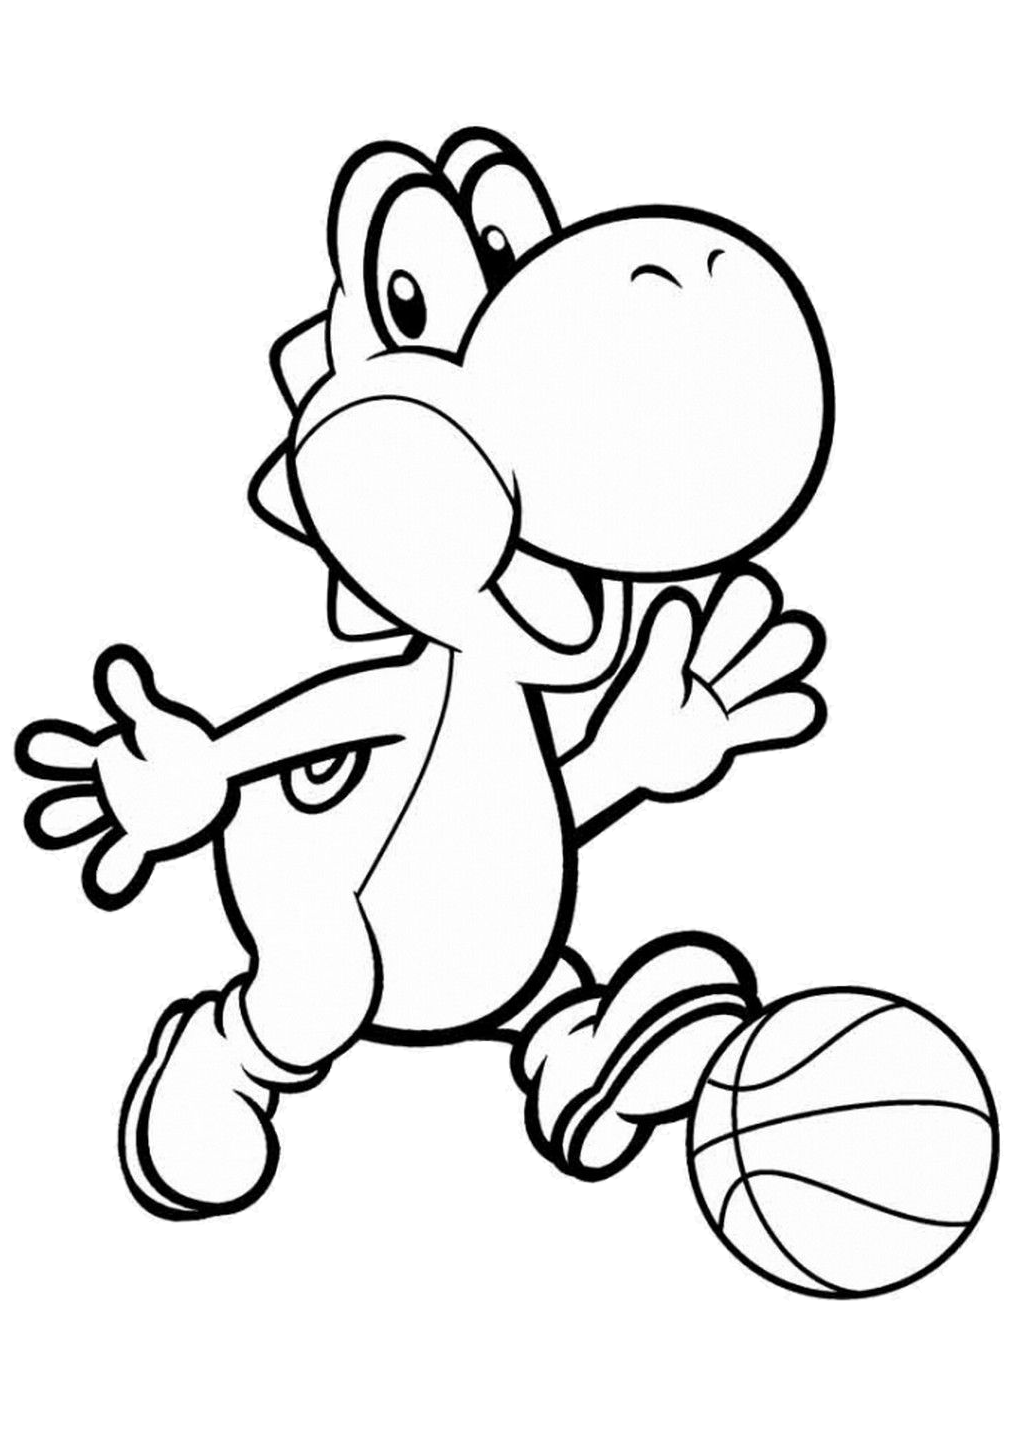 Mario Dinosaur Land Yoshi Coloring Pages Happy Yoshi Playing With a Ball